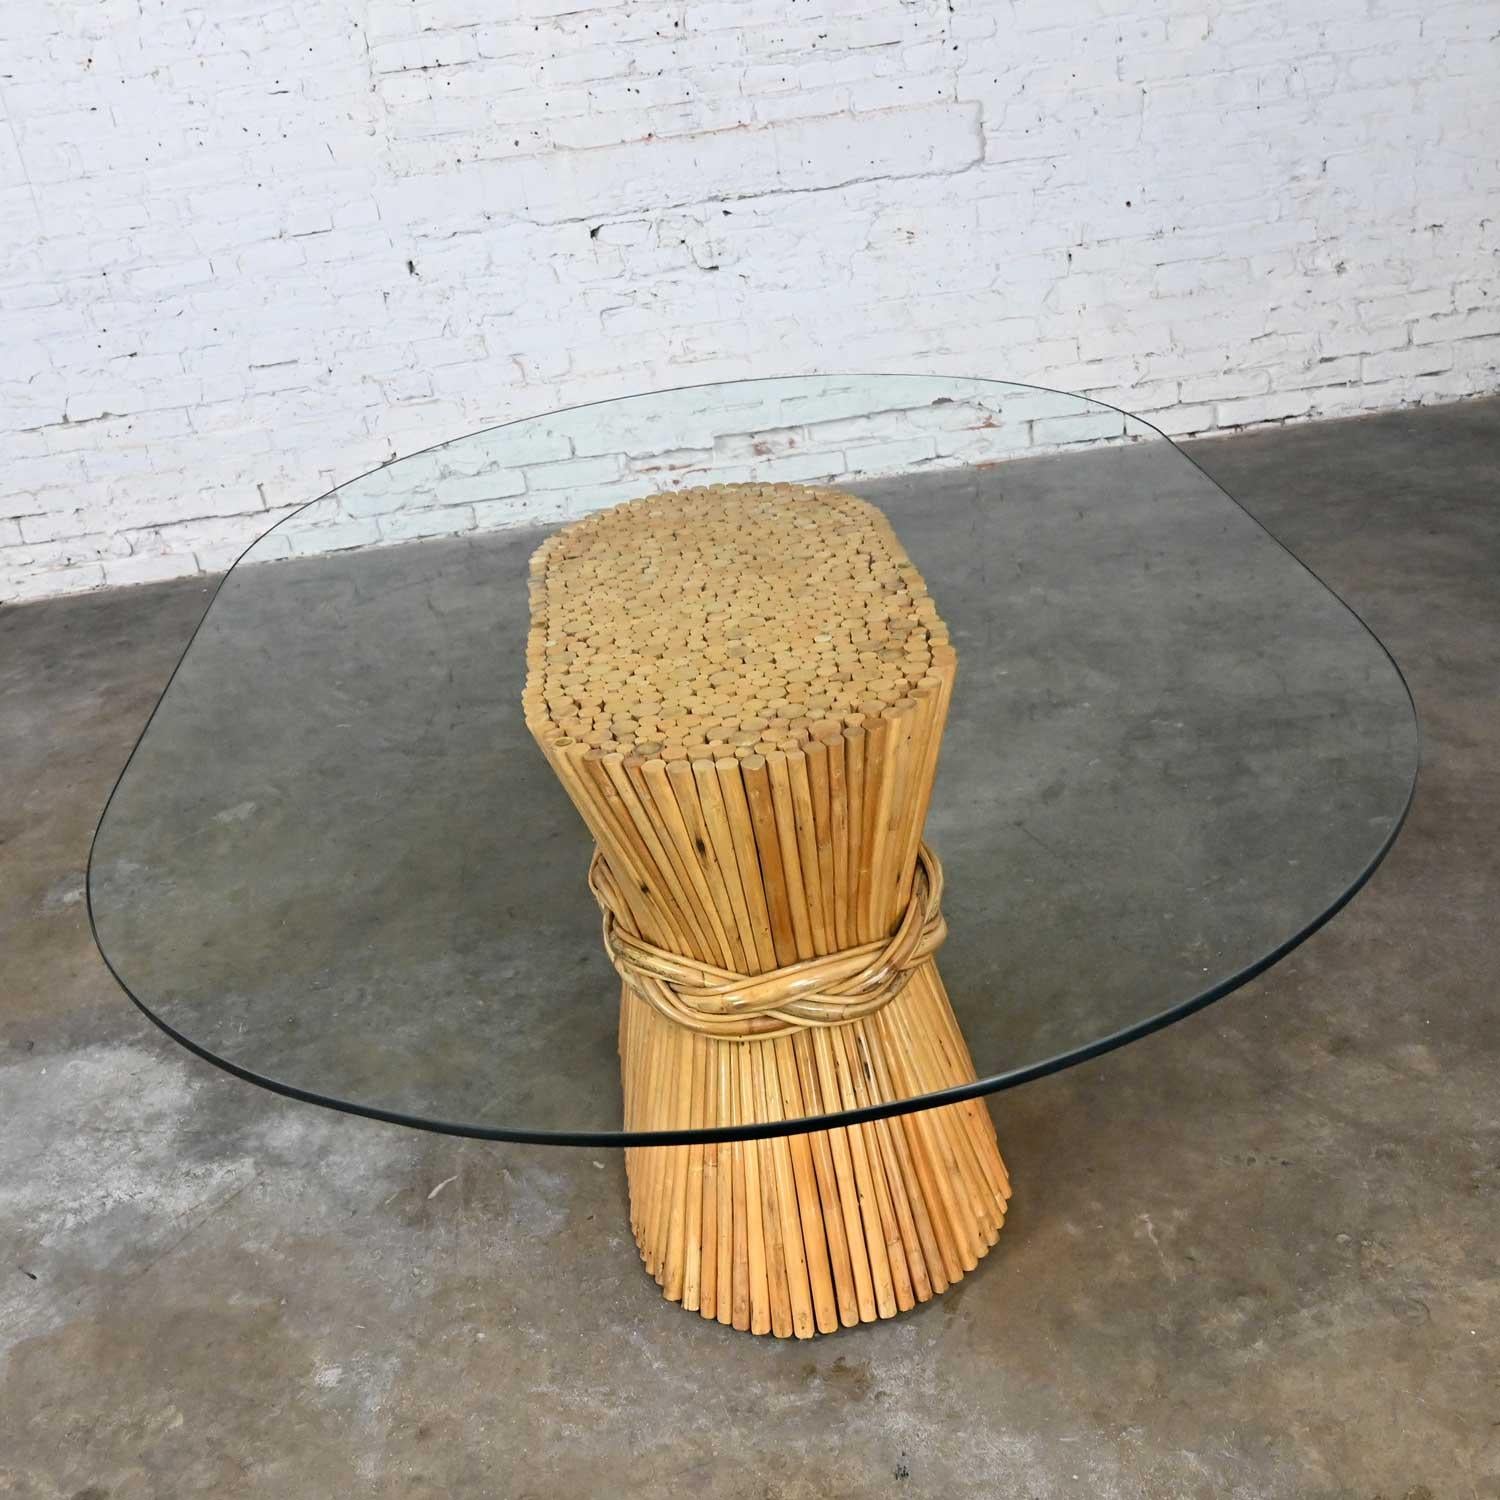 Stunning vintage racetrack oval shaped natural rattan sheaf of wheat dining table with racetrack oval glass top in the style of McGuire. Beautiful condition, keeping in mind that this is vintage and not new so will have signs of use and wear. Please